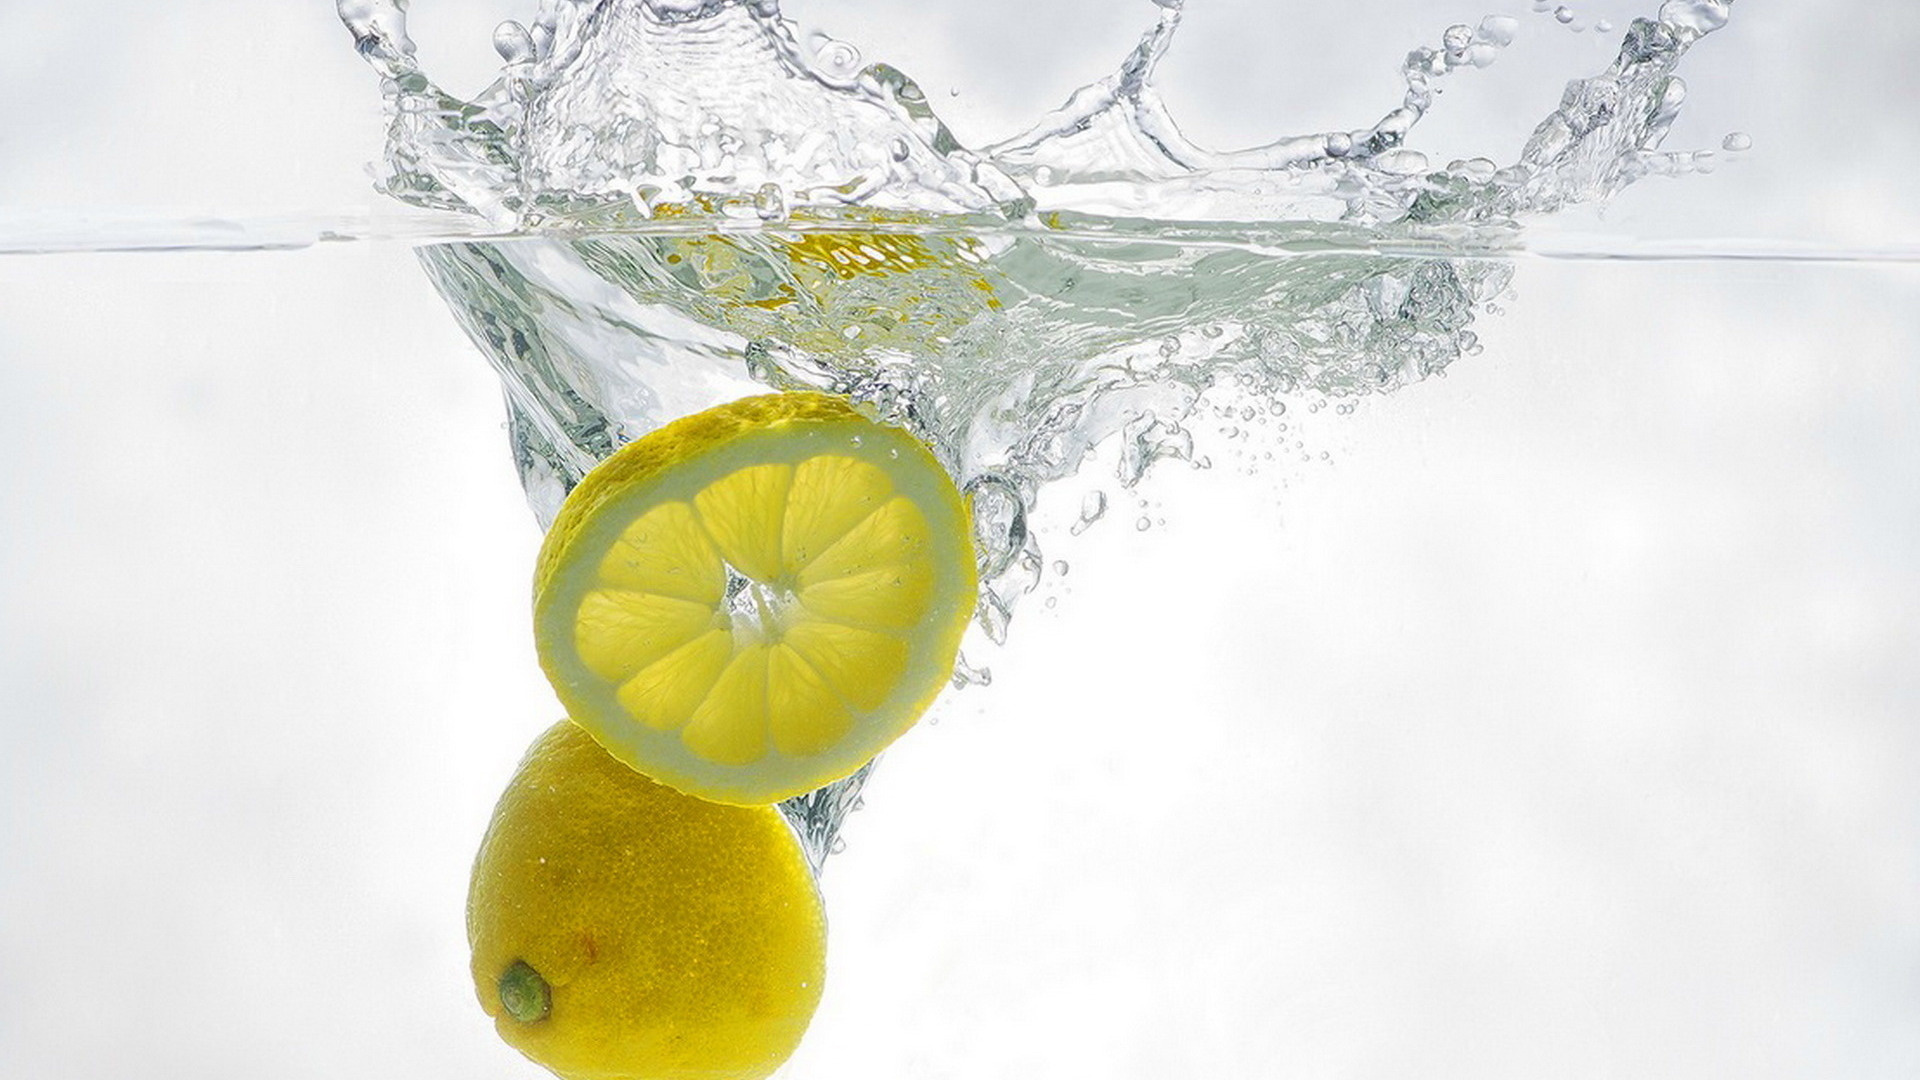 Lemon: Contain numerous phytochemicals, including polyphenols, terpenes, and tannins. 1920x1080 Full HD Wallpaper.